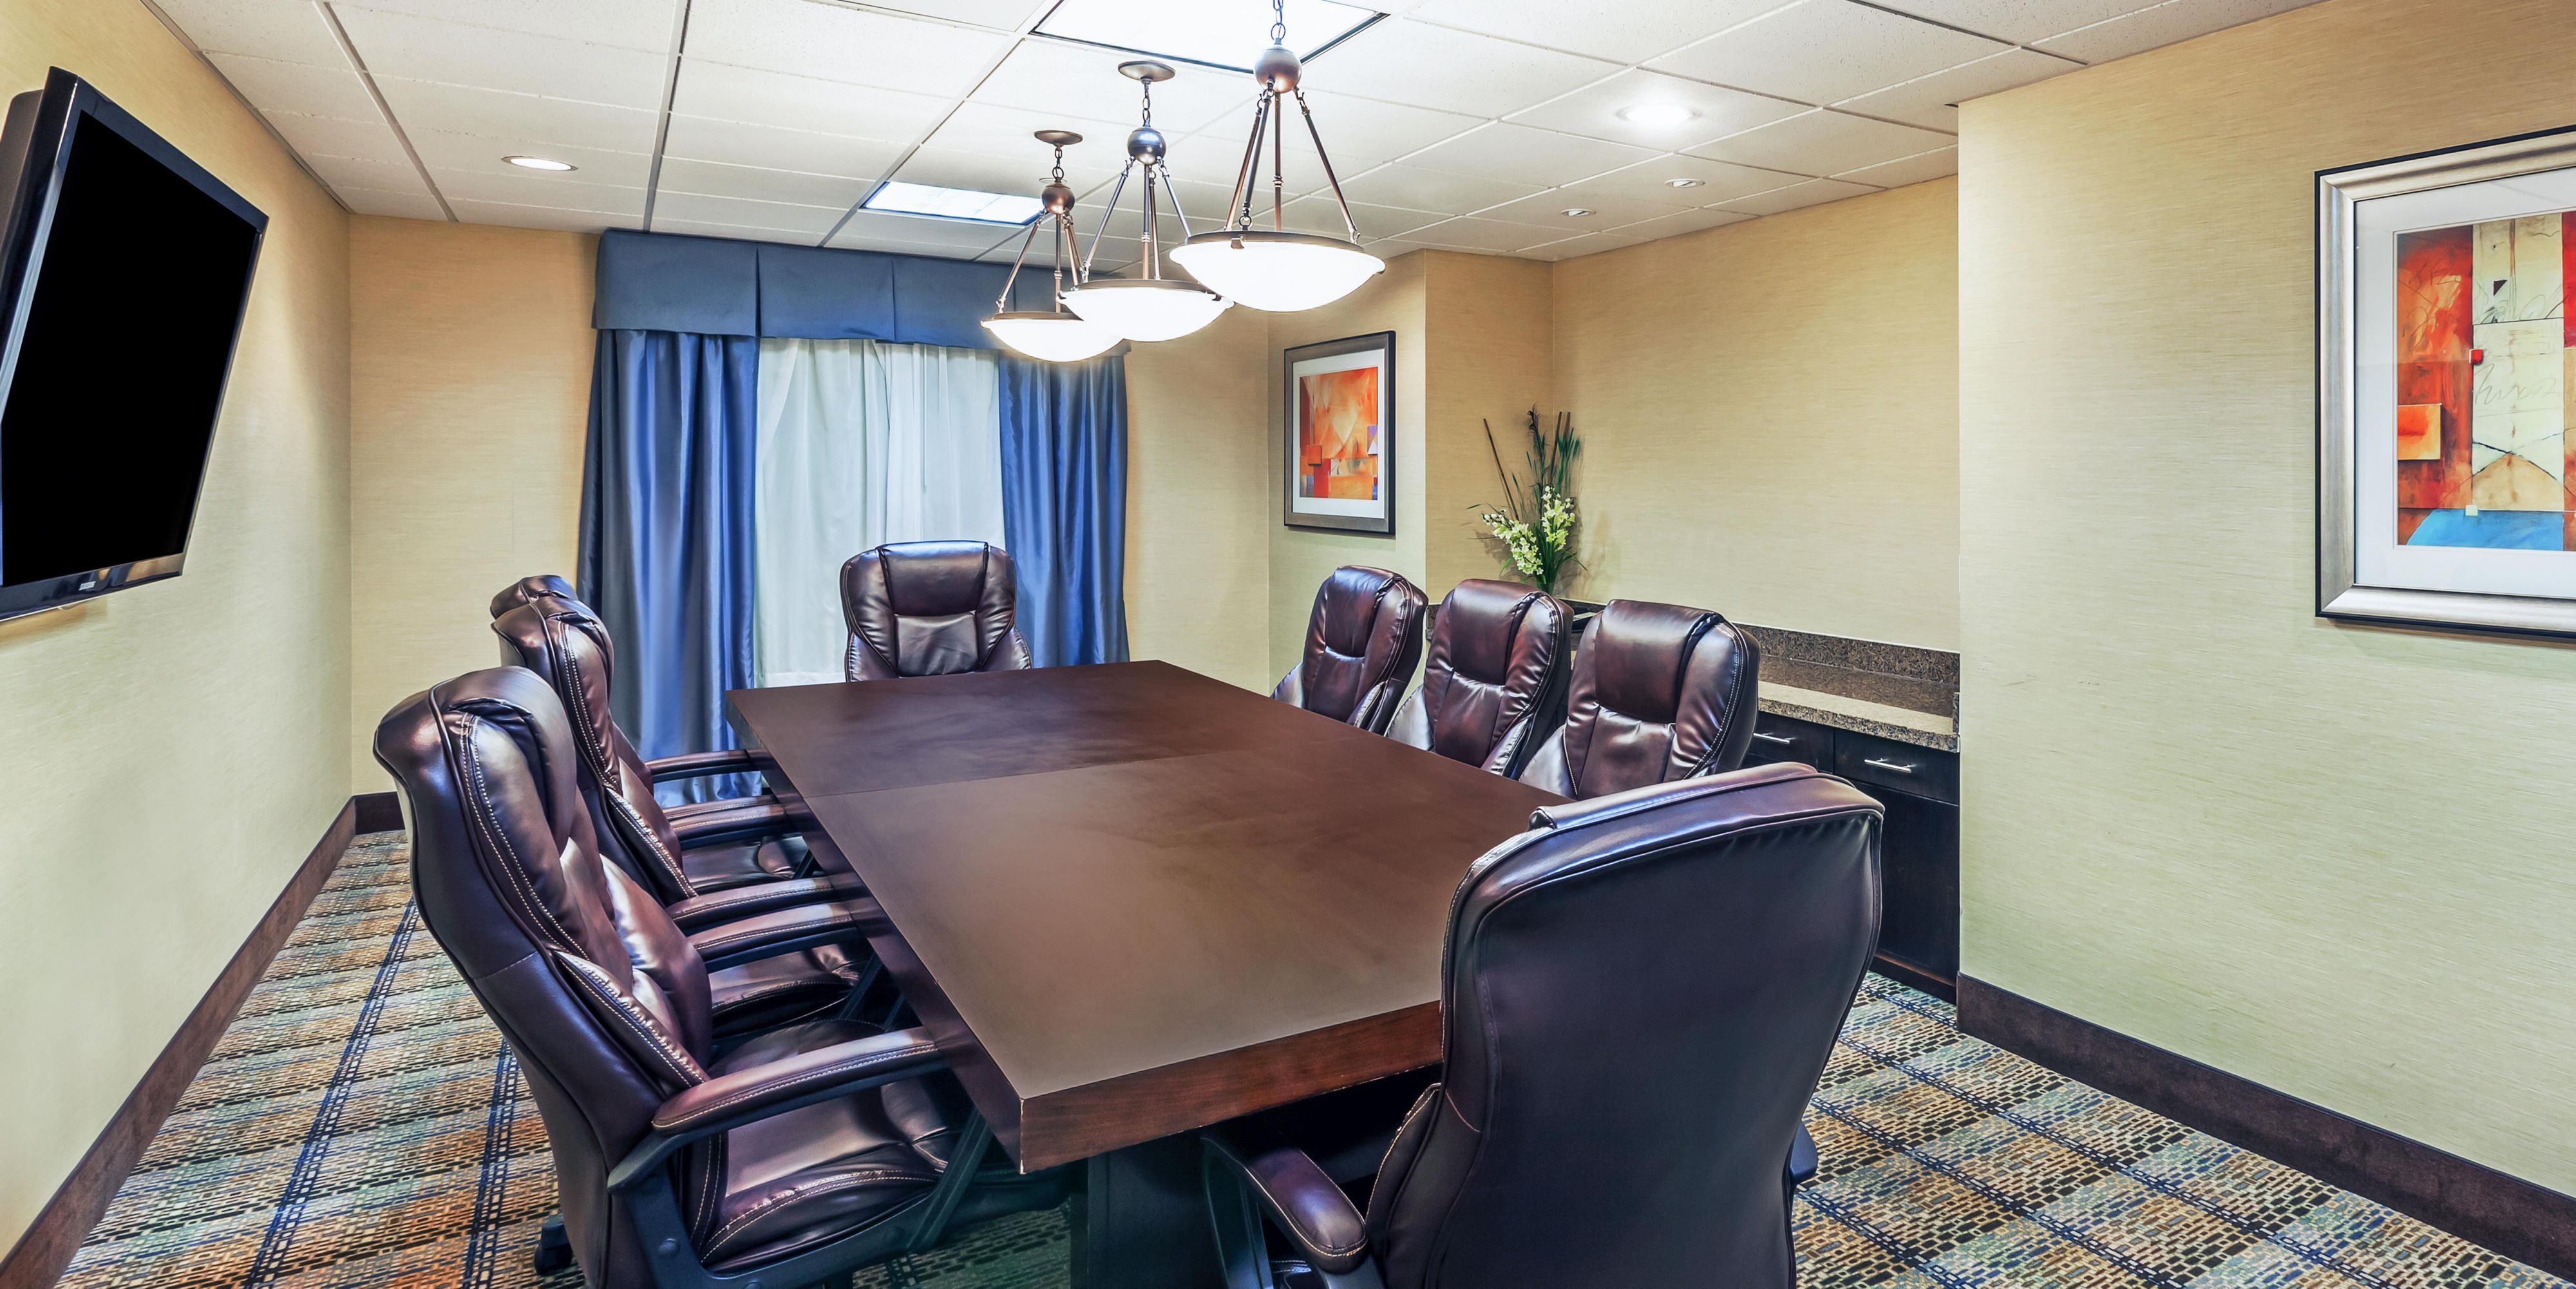 Small meetings play a vital role in the success of many organizations. Are you planning a small corporate meeting, board retreat or brainstorming session? Our 500 square feet meeting room is sure to lead to big ideas! We can accommodate up to 14 people and can take care of all your audio/visual needs as well.